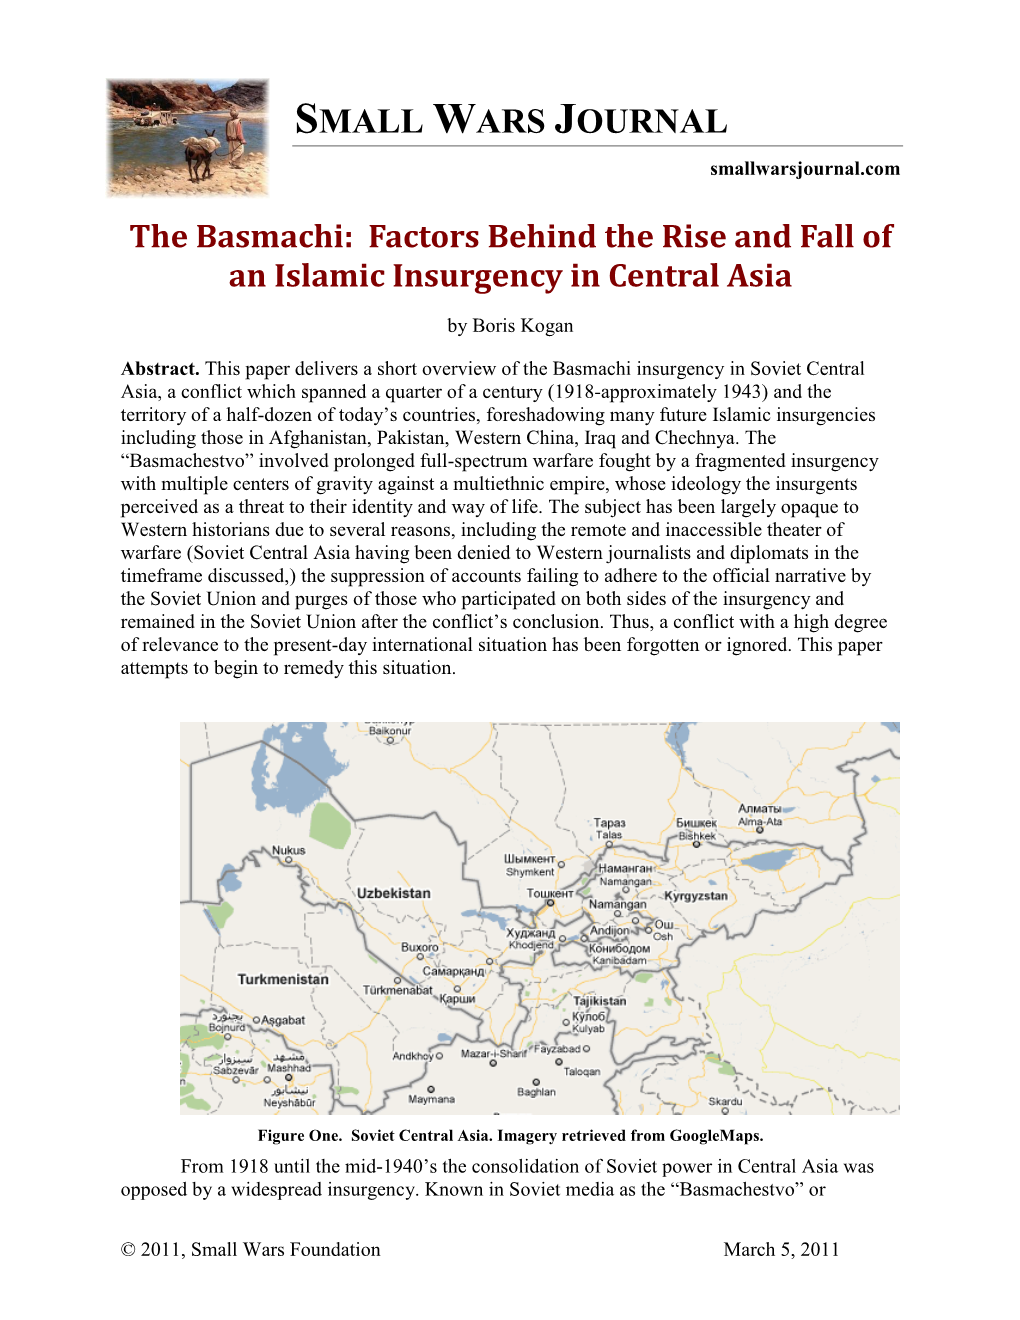 The Basmachi: Factors Behind the Rise and Fall of an Islamic Insurgency in Central Asia